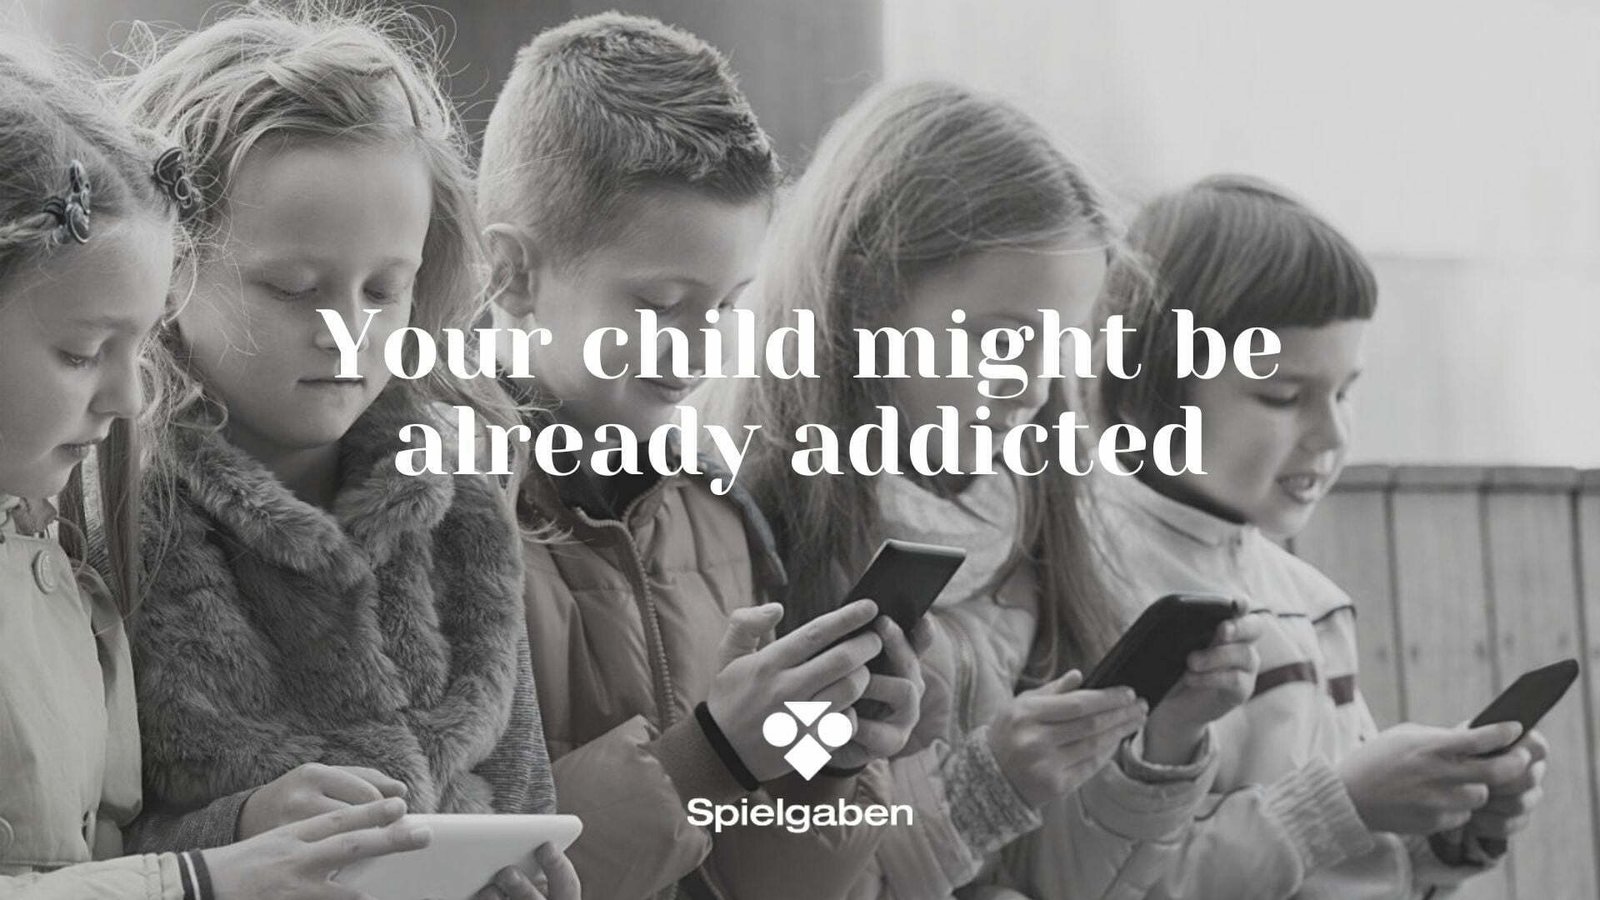 Your child might be already addicted